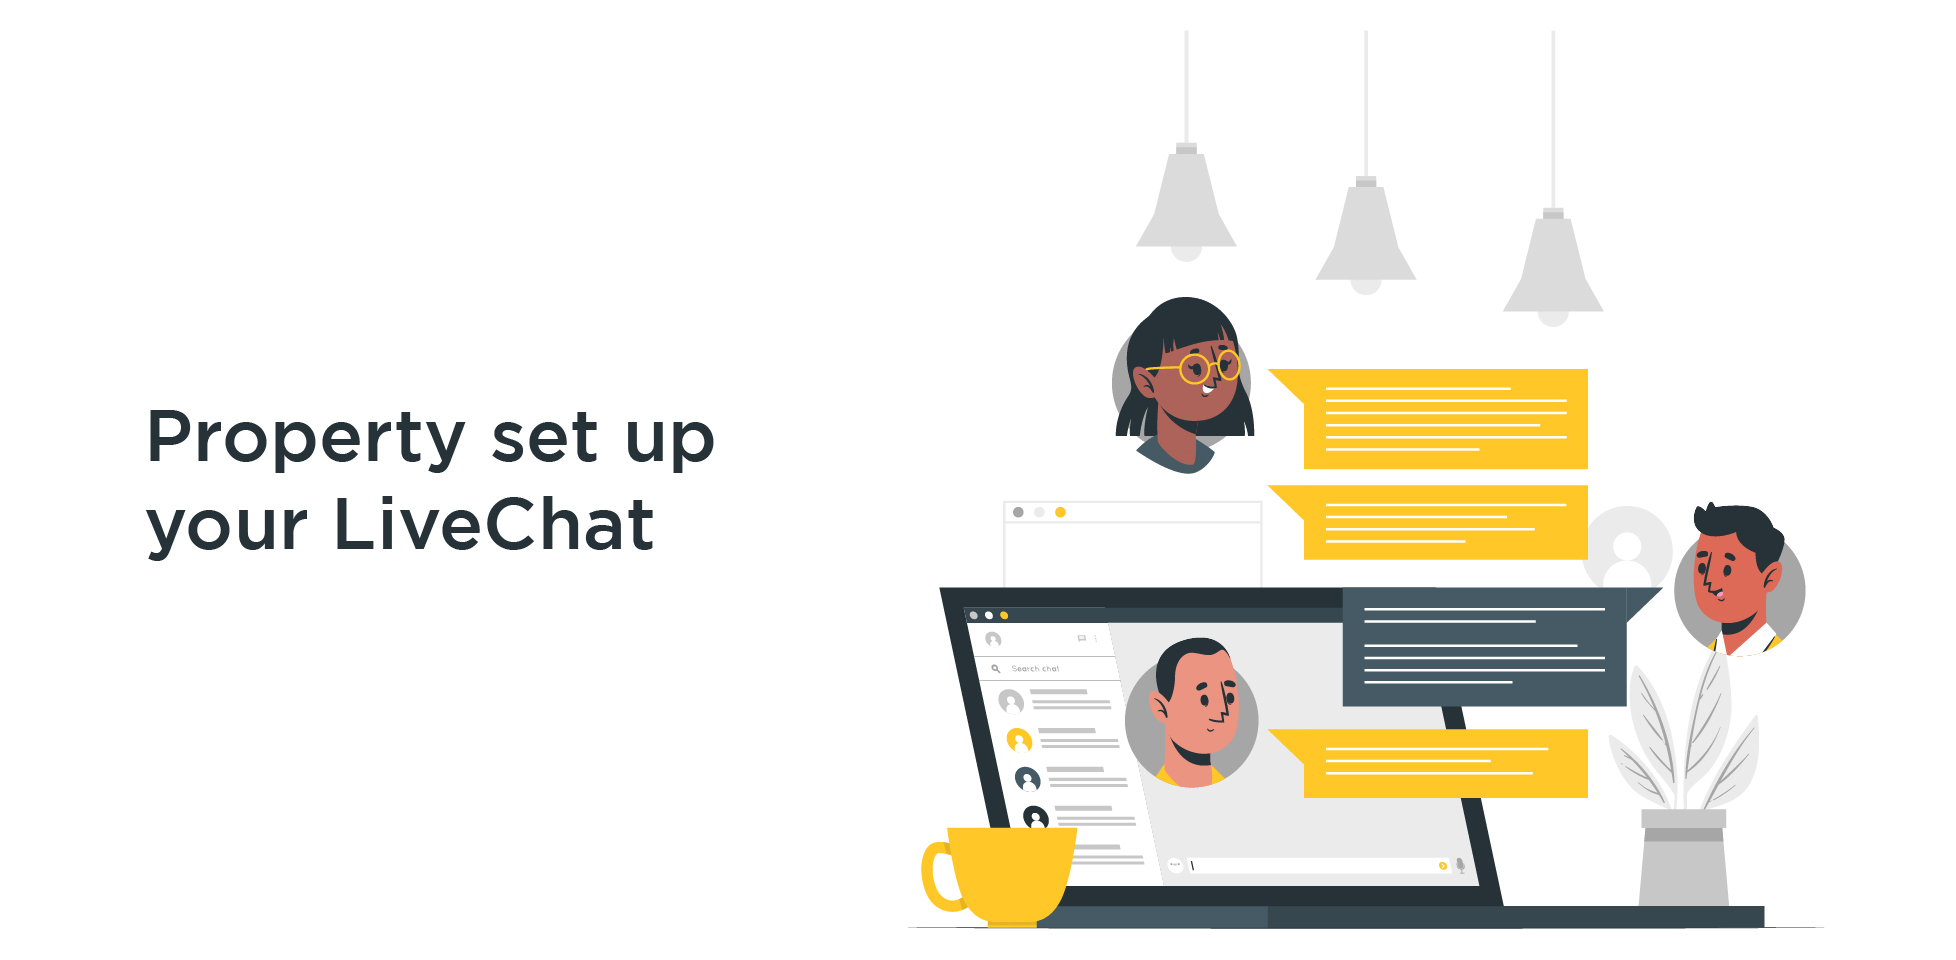 Property set up your LiveChat